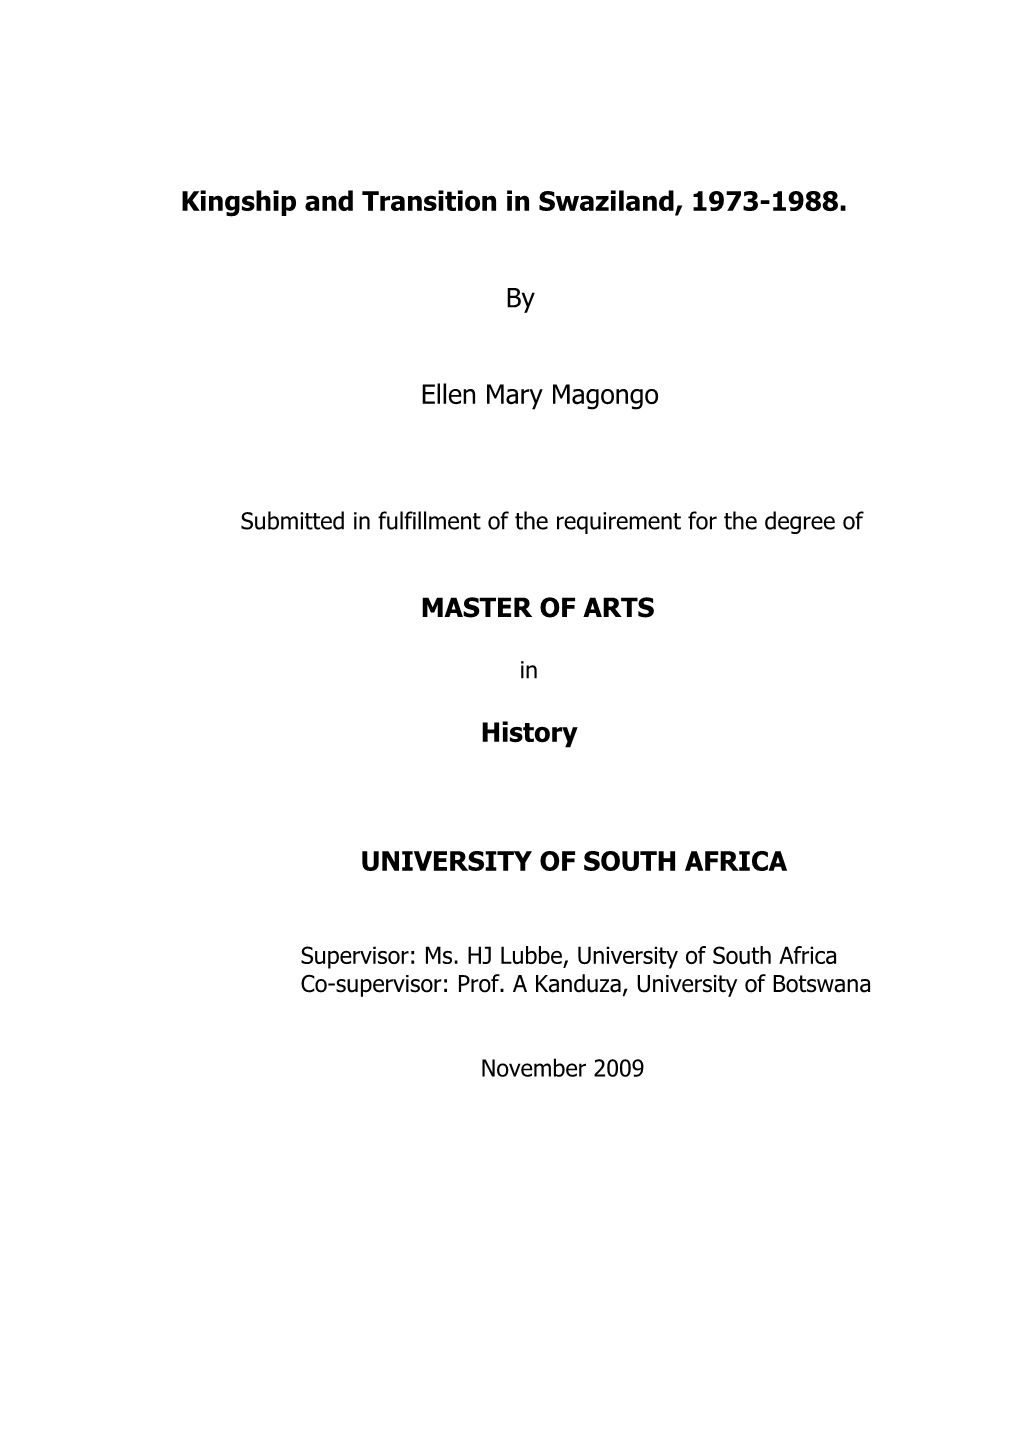 Kingship and Transition in Swaziland, 1973-1988. by Ellen Mary